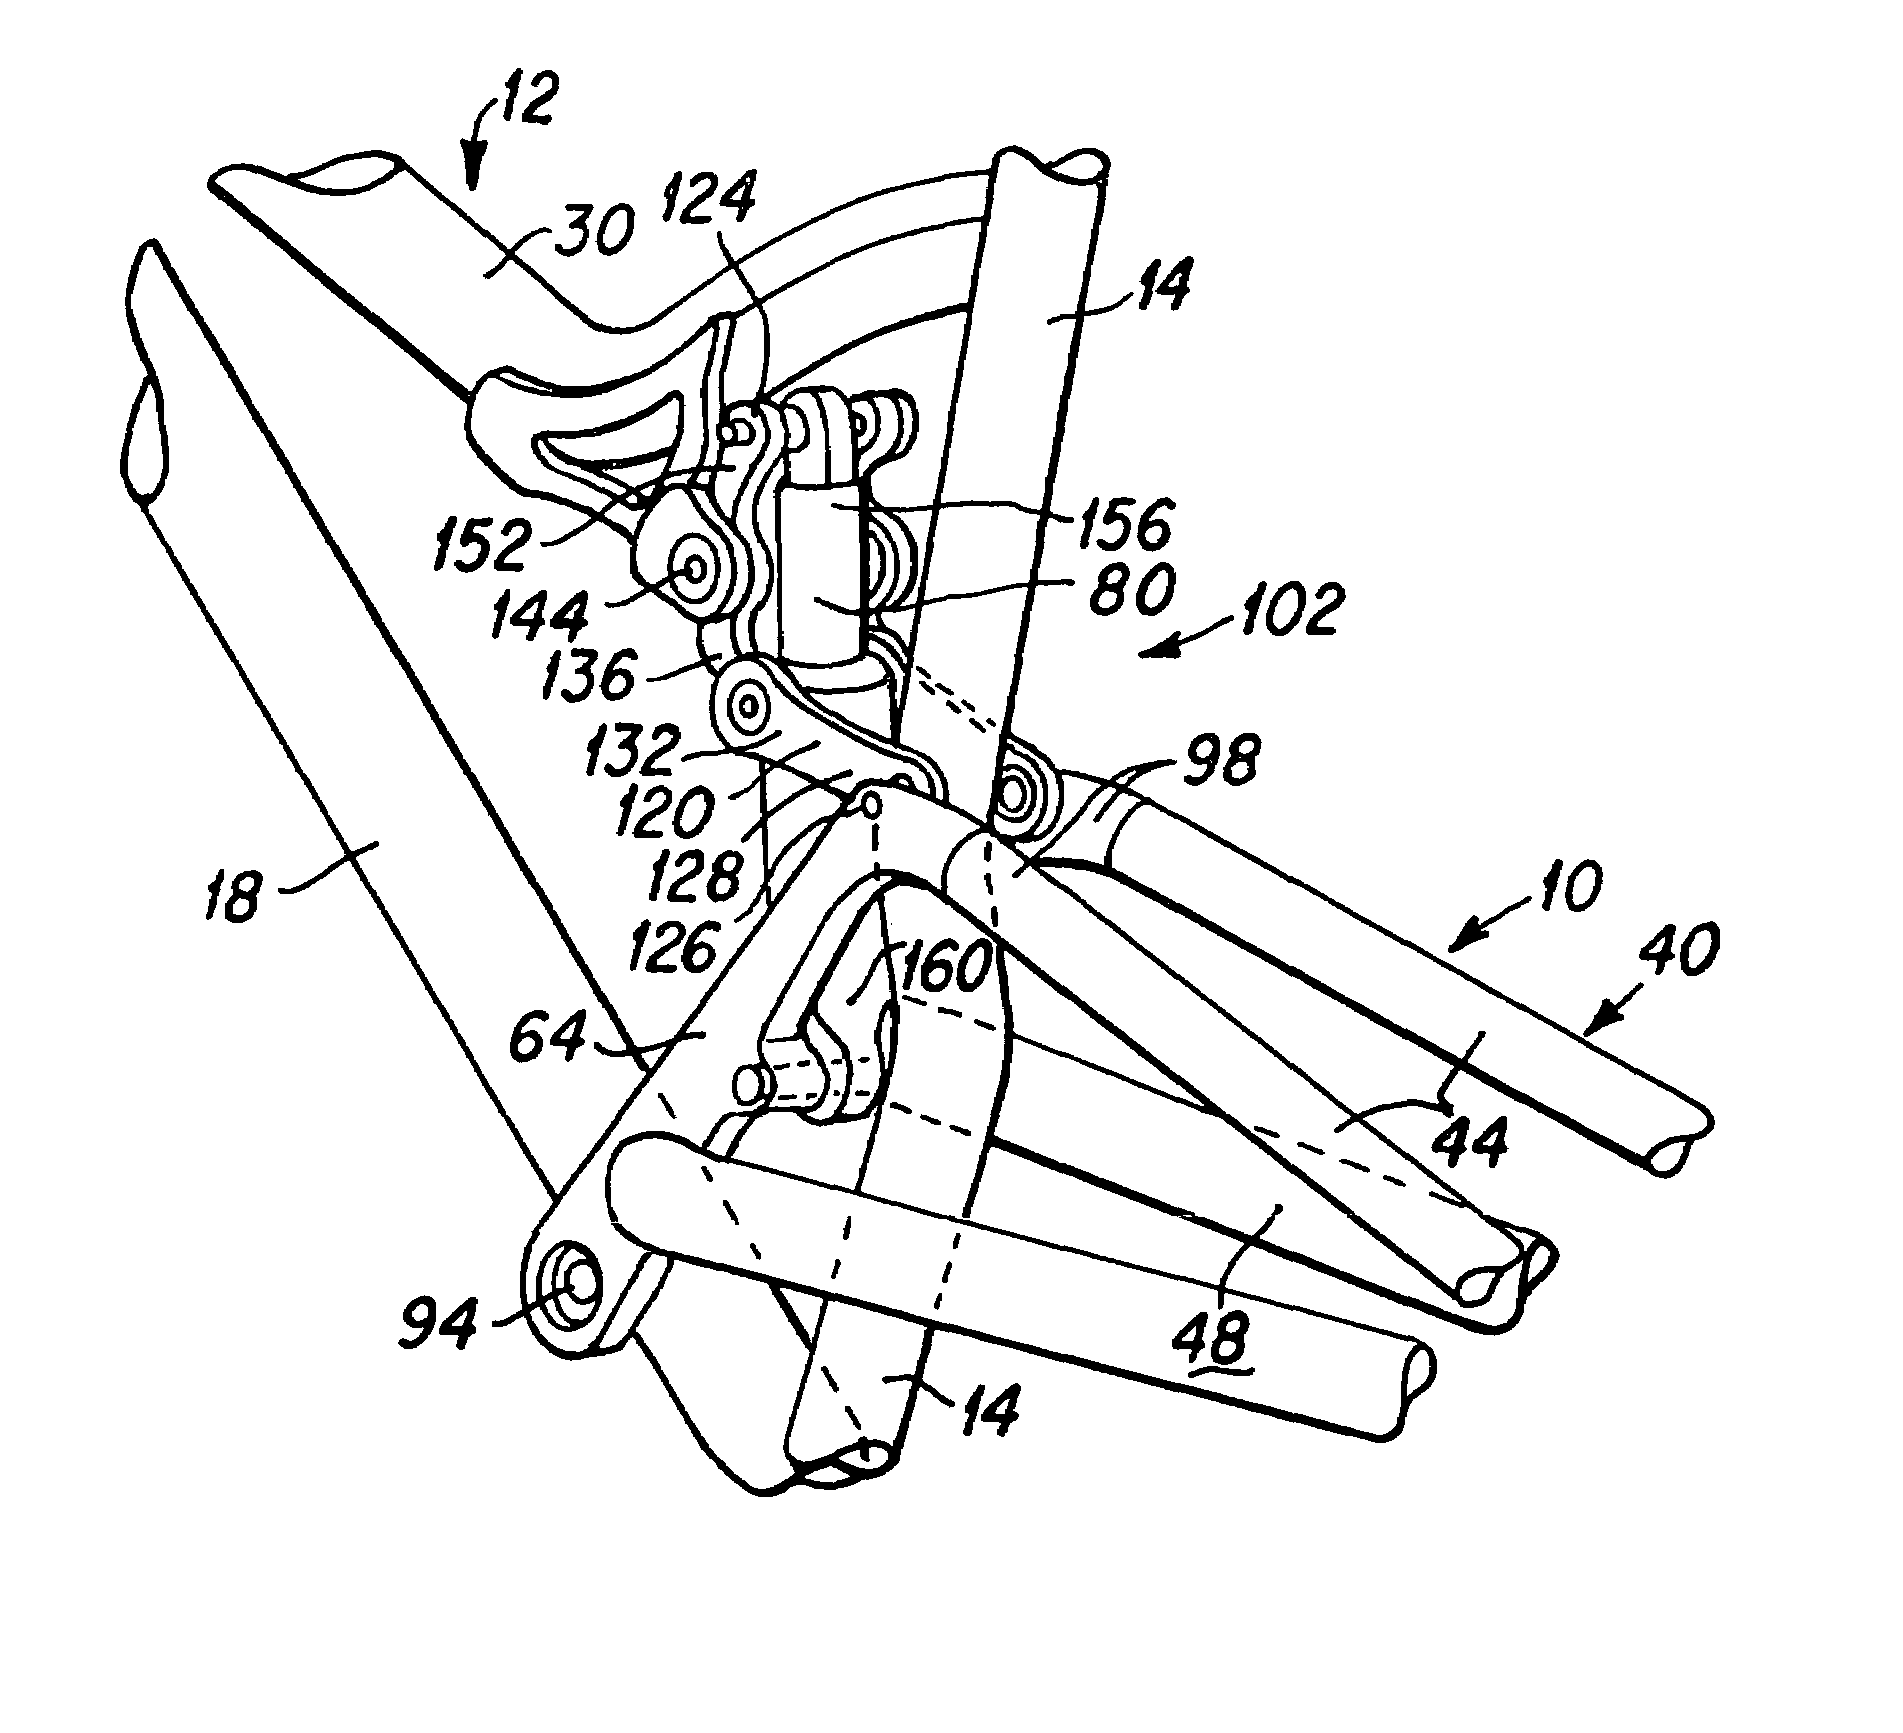 Bicycle rear wheel suspension system with controlled variable shock rate